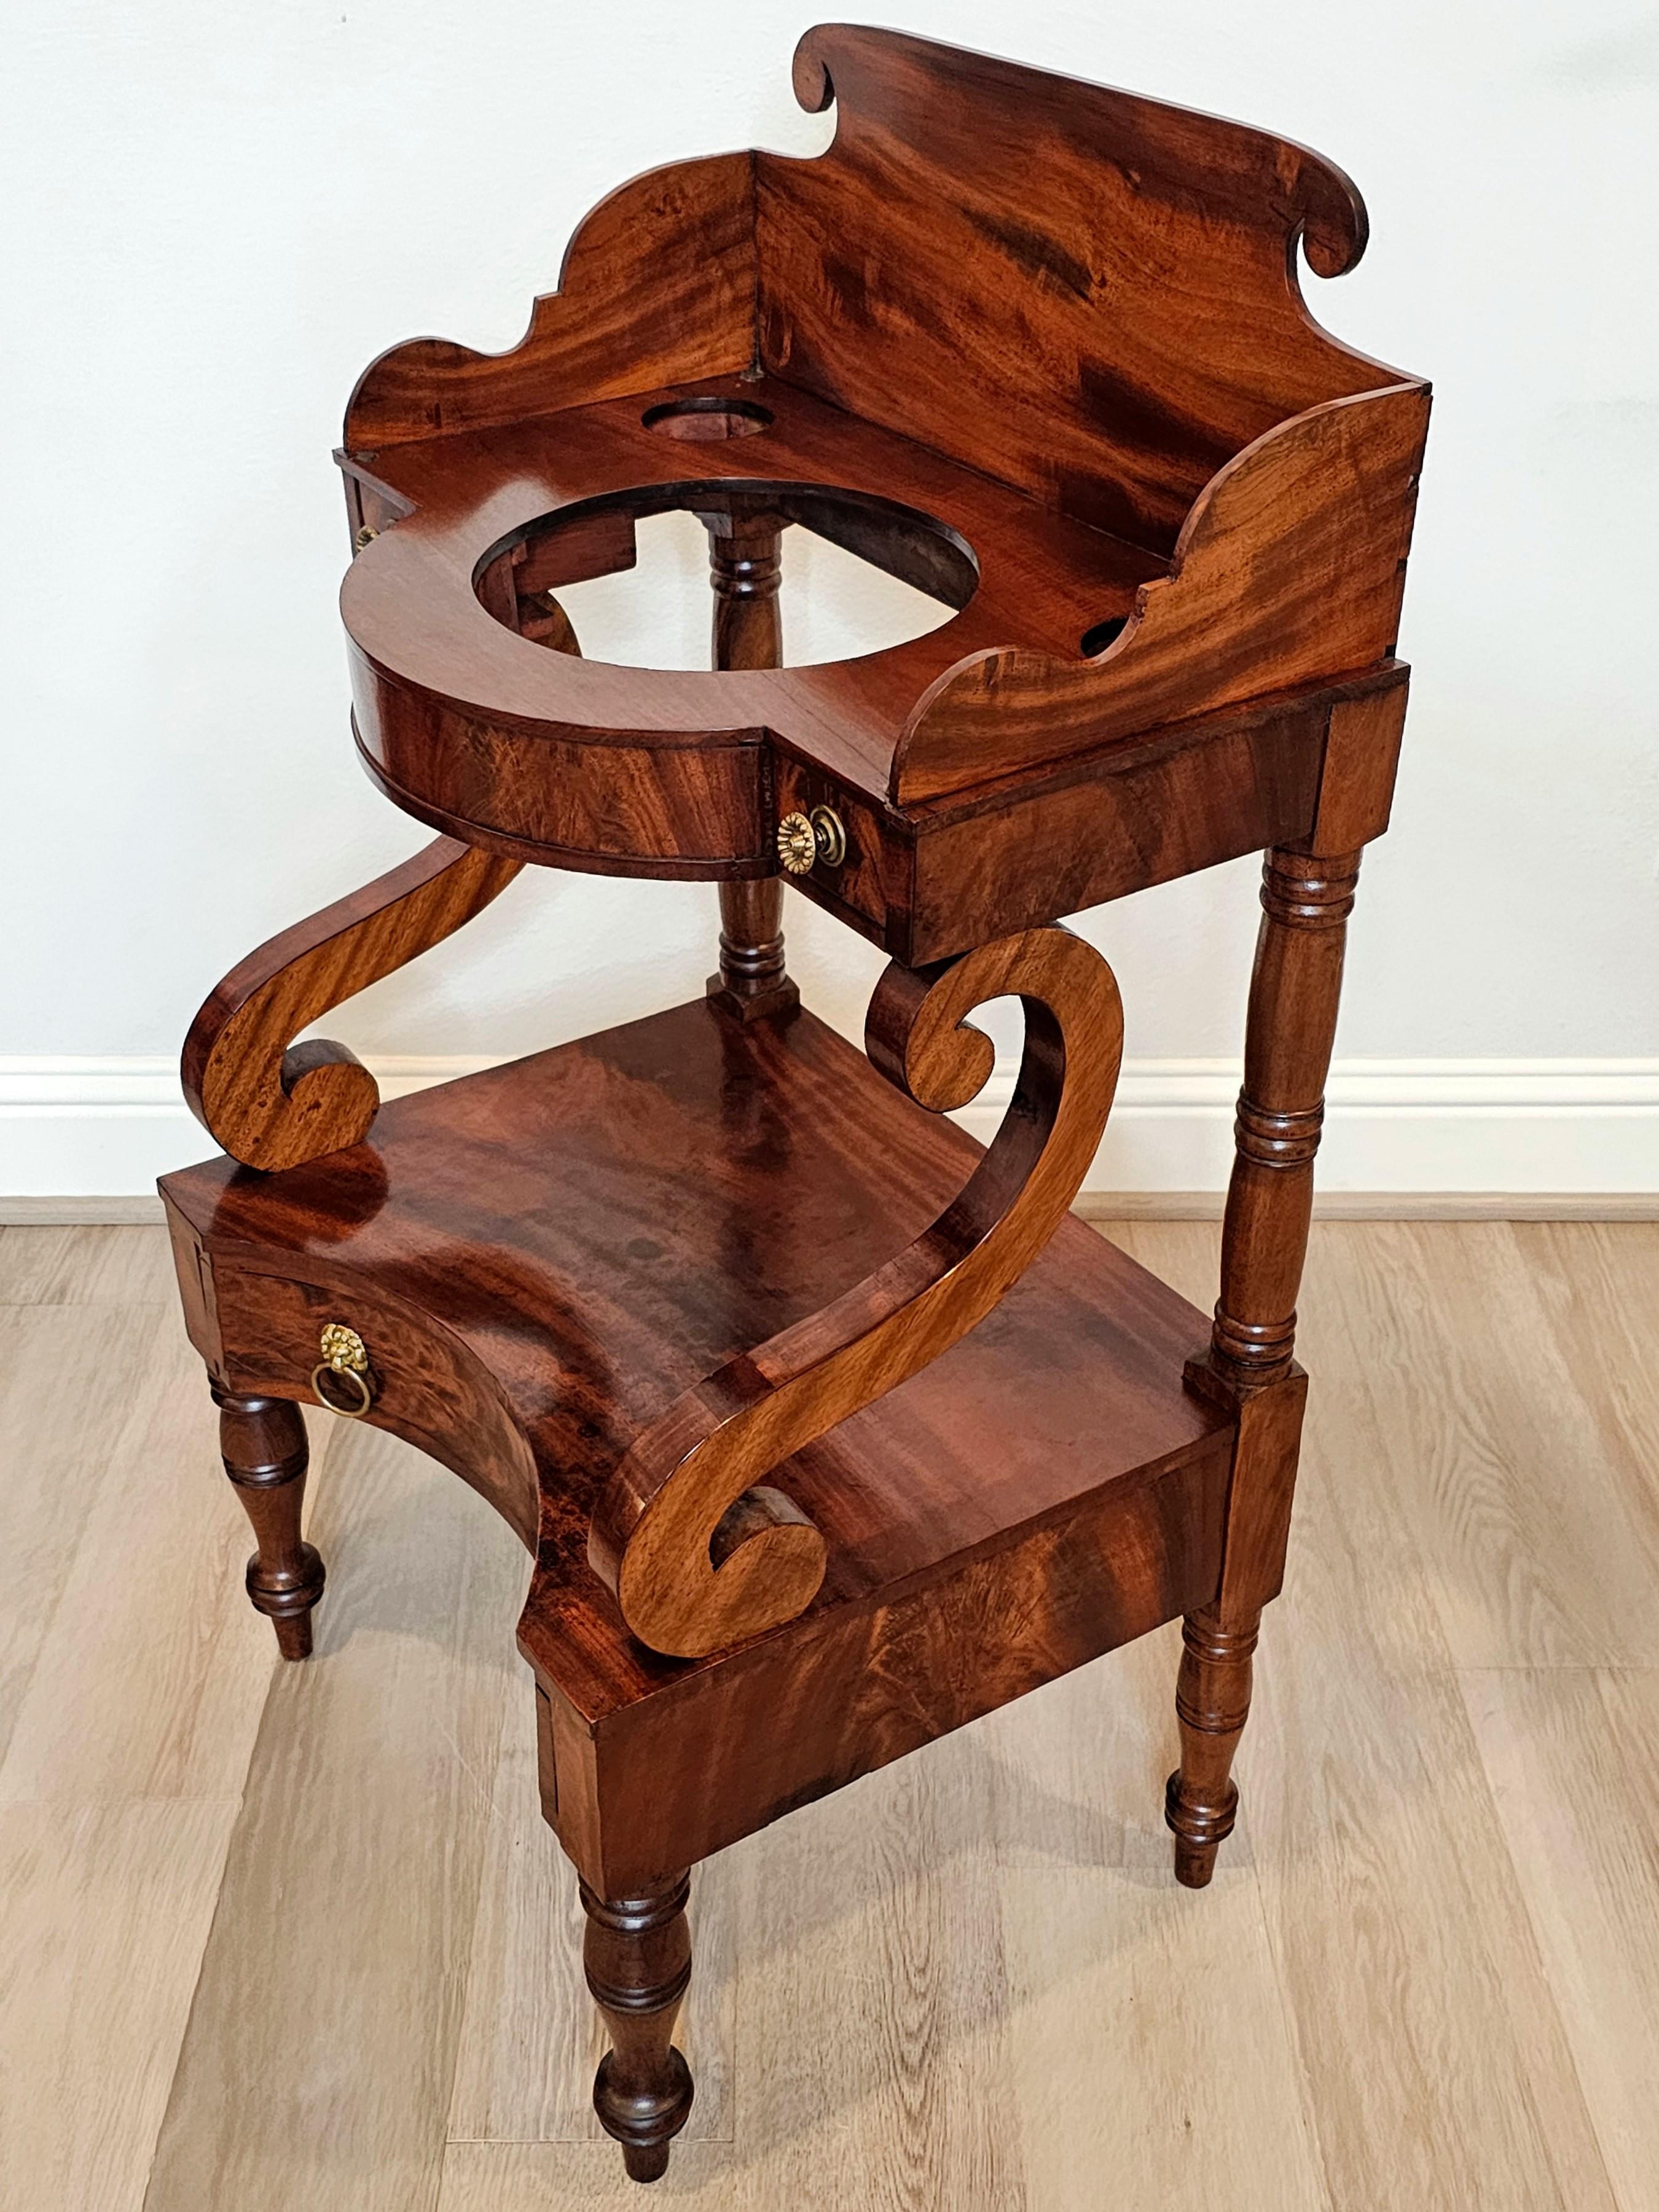 Hand-Crafted Early American Federal Period Flame Mahogany Antique Wash Stand  For Sale